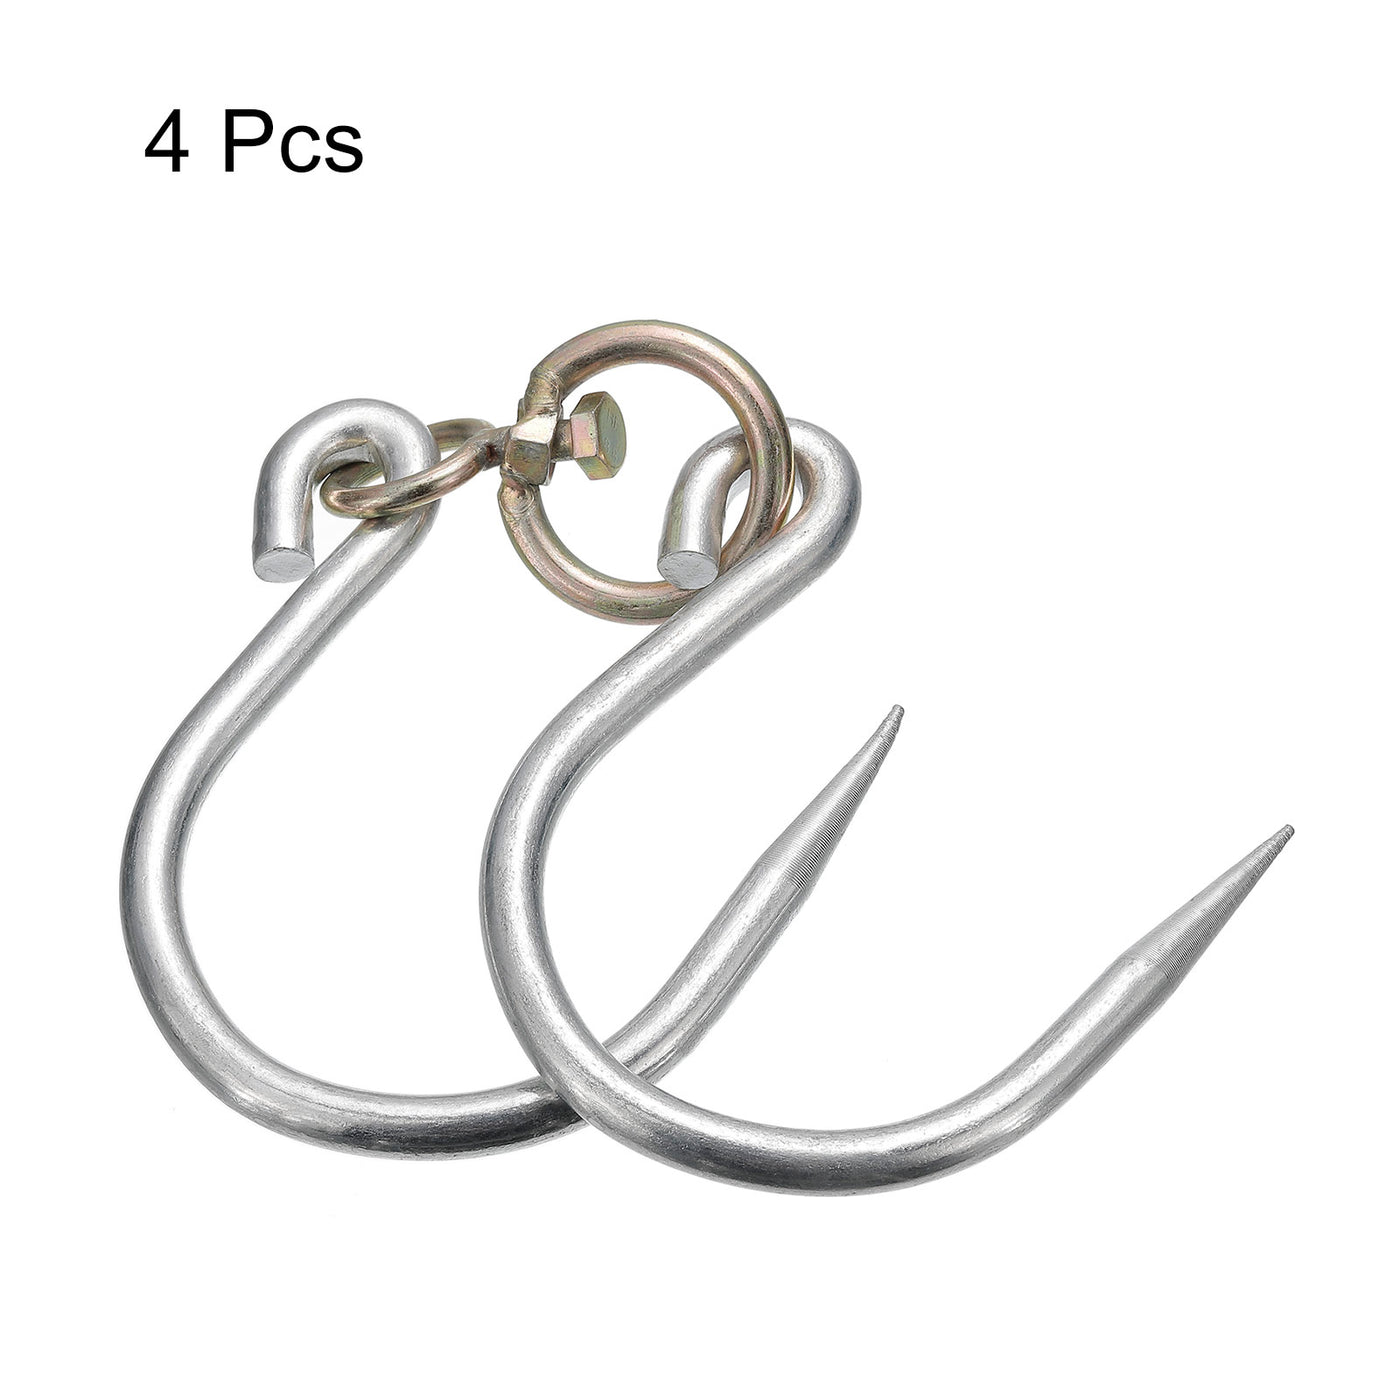 uxcell Uxcell Swivel Meat Hooks, Galvanized Processing Butcher Hooks for Hanging Drying Smoking Meat